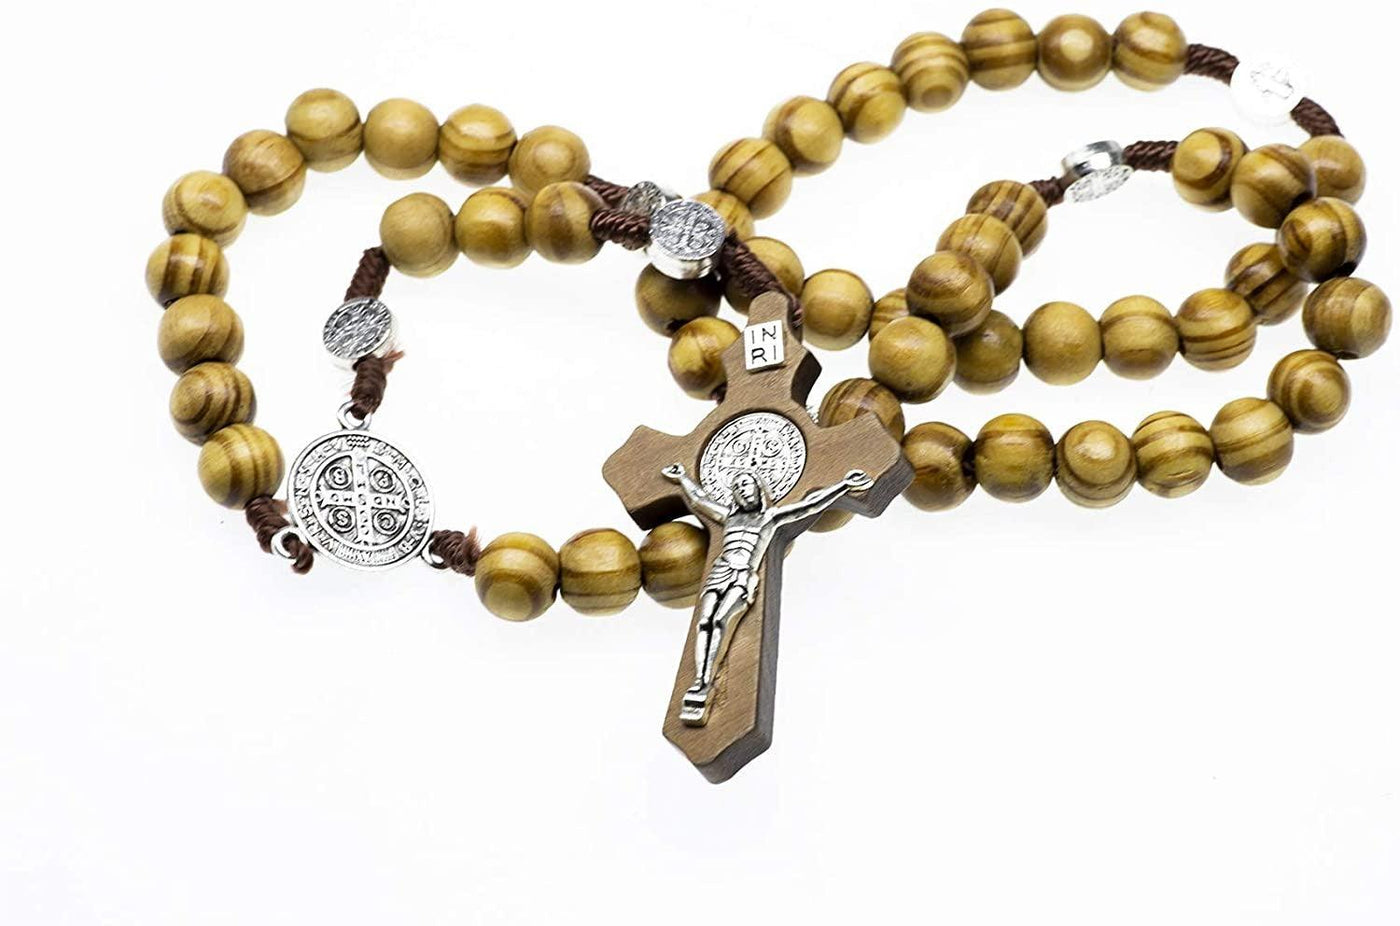 Blessed Prayer Rosary beads made from genuine Holy Land olive wood with Crucifix - Spring Nahal